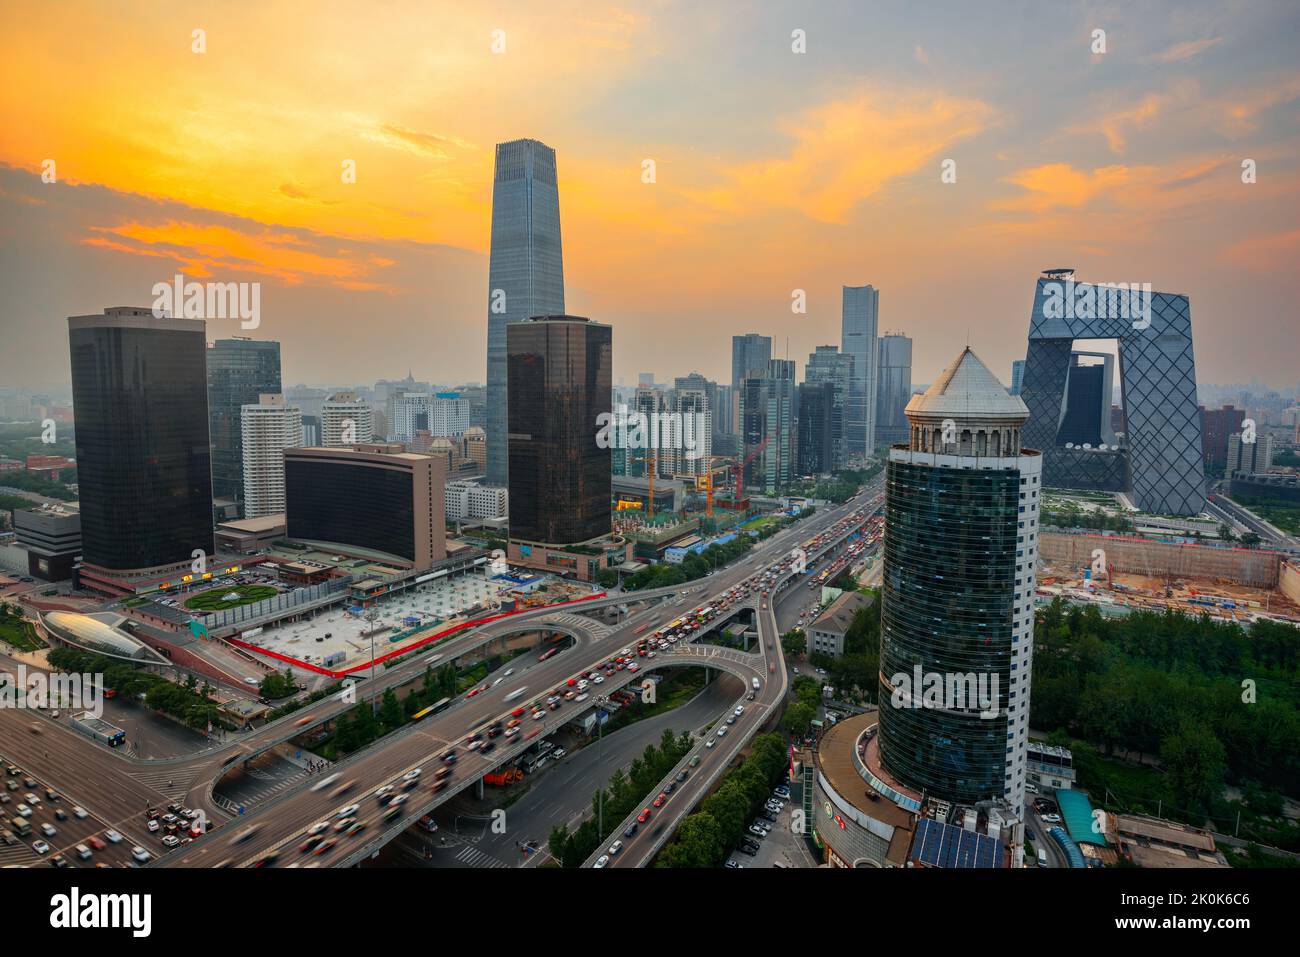 Beijing, China overlooking the central business district skyline at sunset. Stock Photo